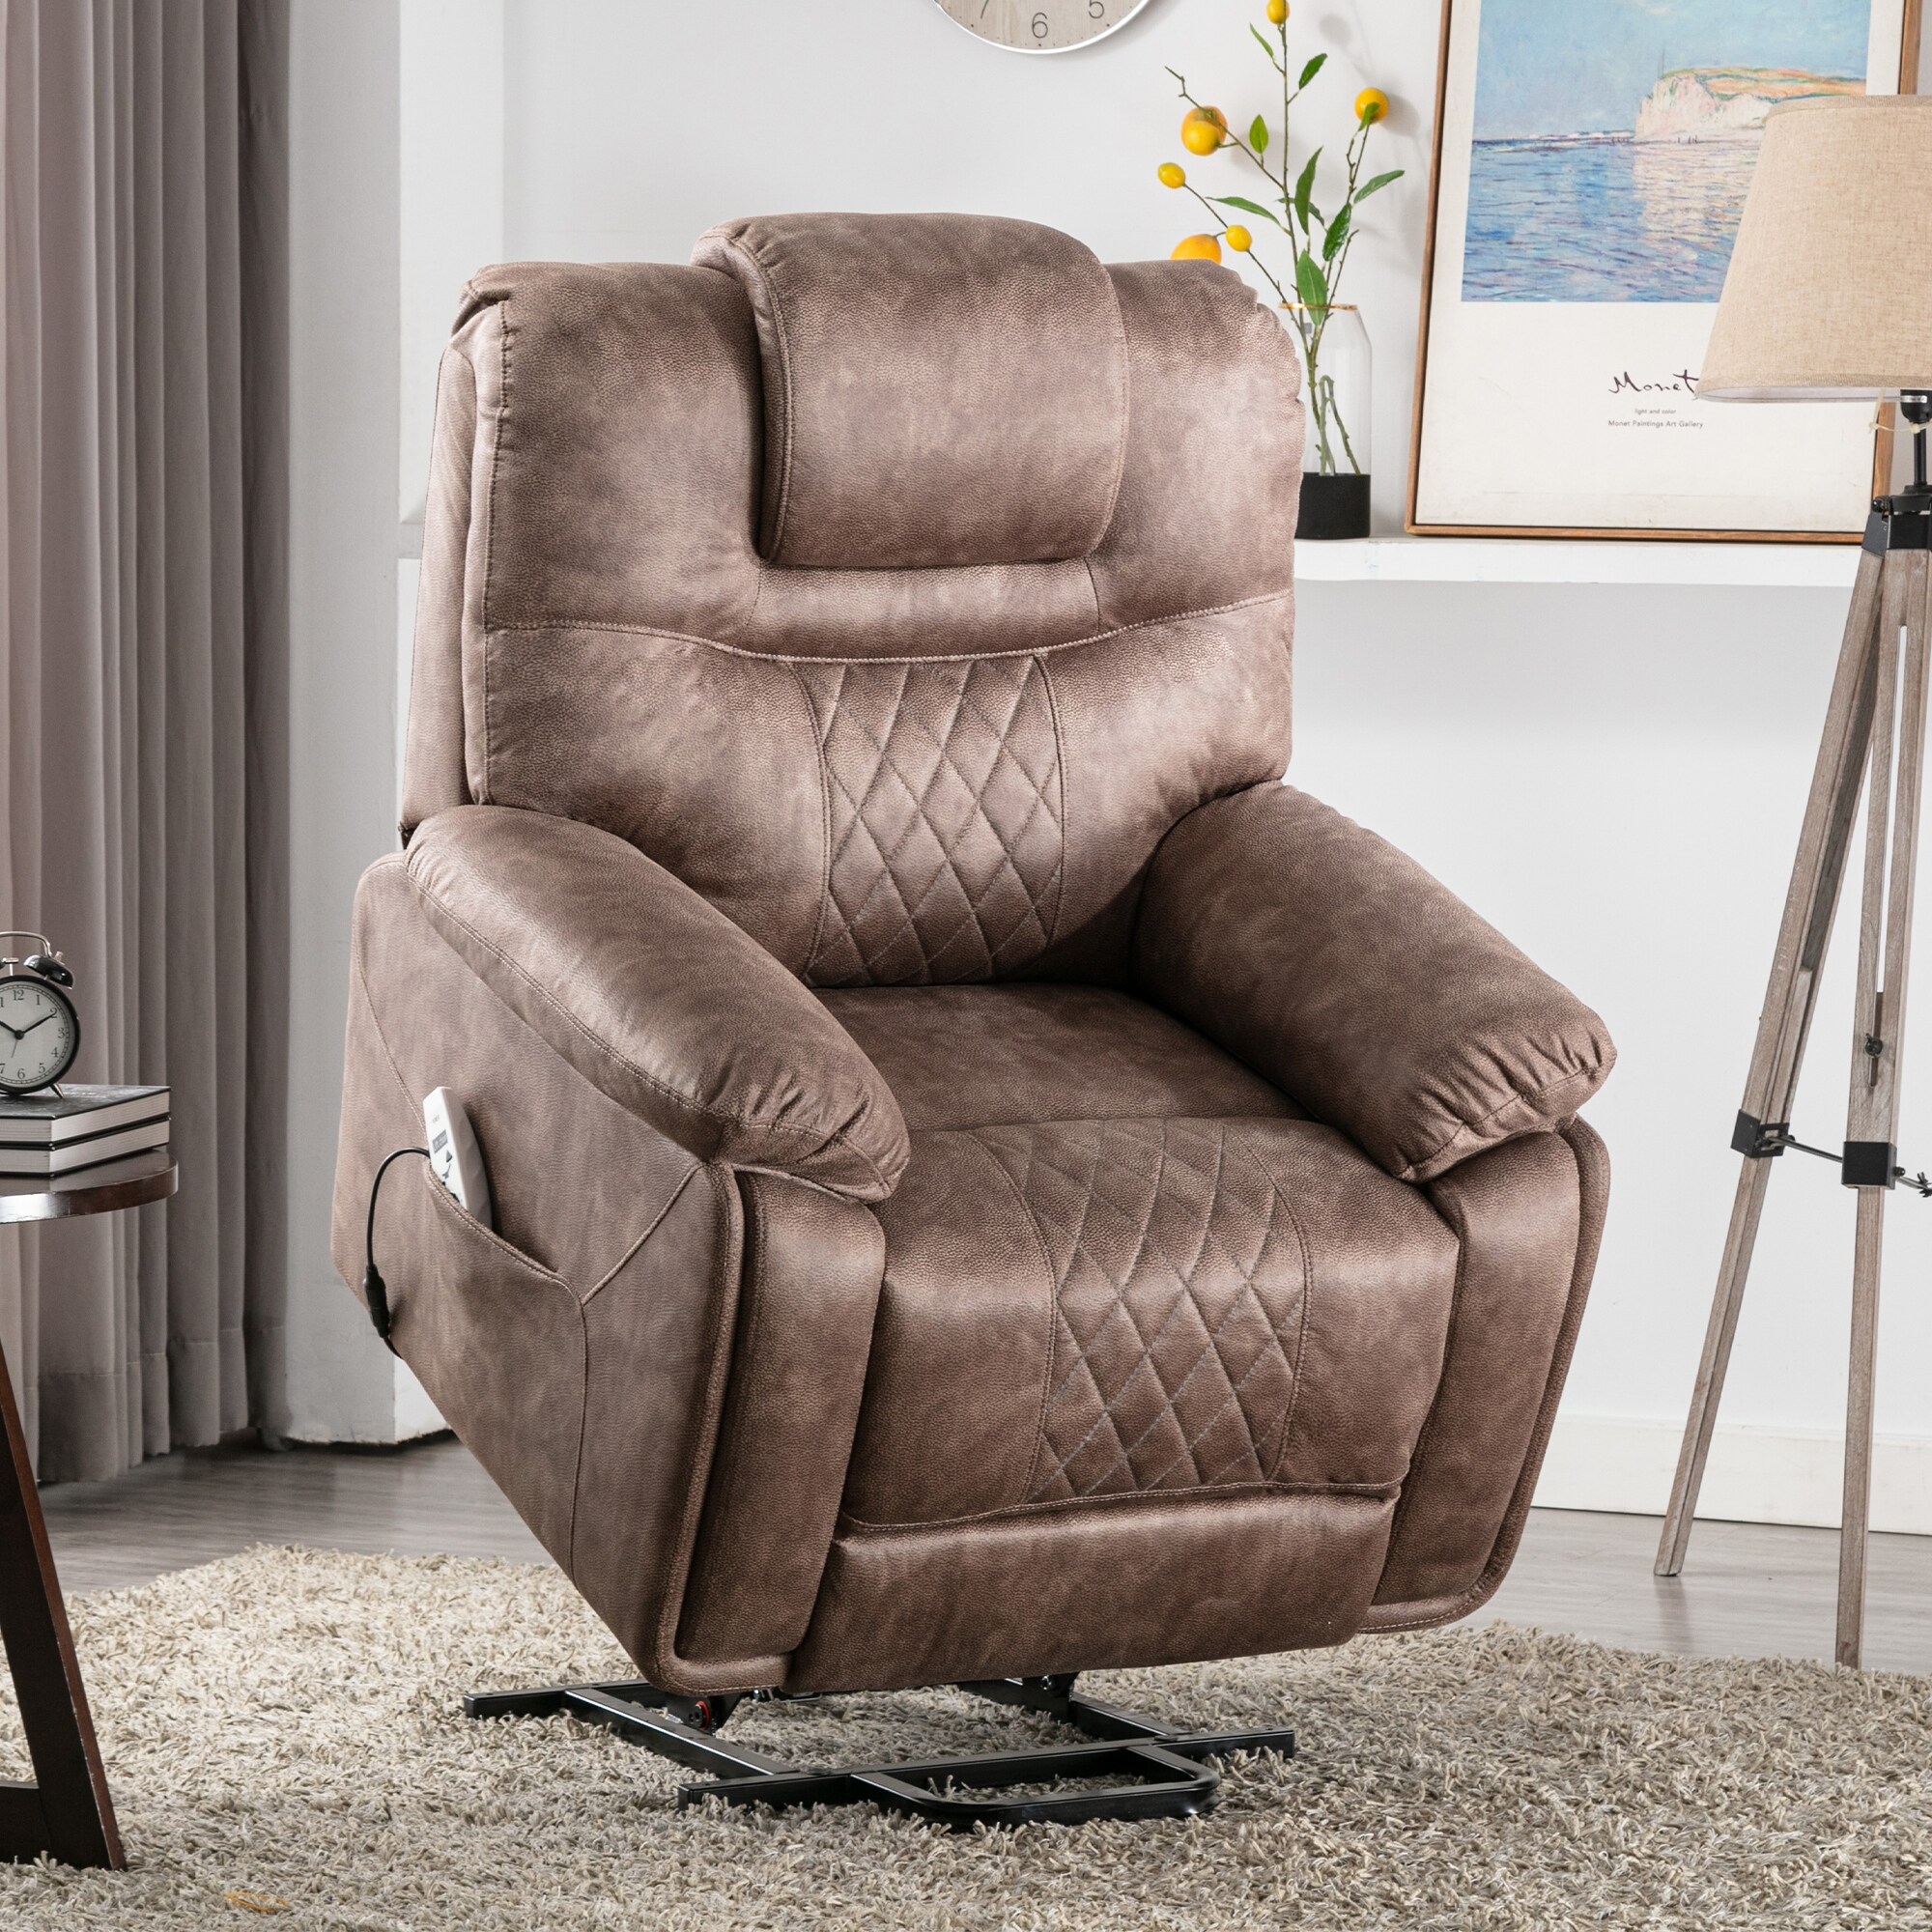 https://ak1.ostkcdn.com/images/products/is/images/direct/1b2824b98b7c48f4c97accc92f3e910f7a411ea7/Power-Lift-Recliner-PU-Leather-Massage-Chairs-Heat-Theater-Seating-with-Remote-Control-Recliners-Chair-for-Livingroom%2C-Brown.jpg